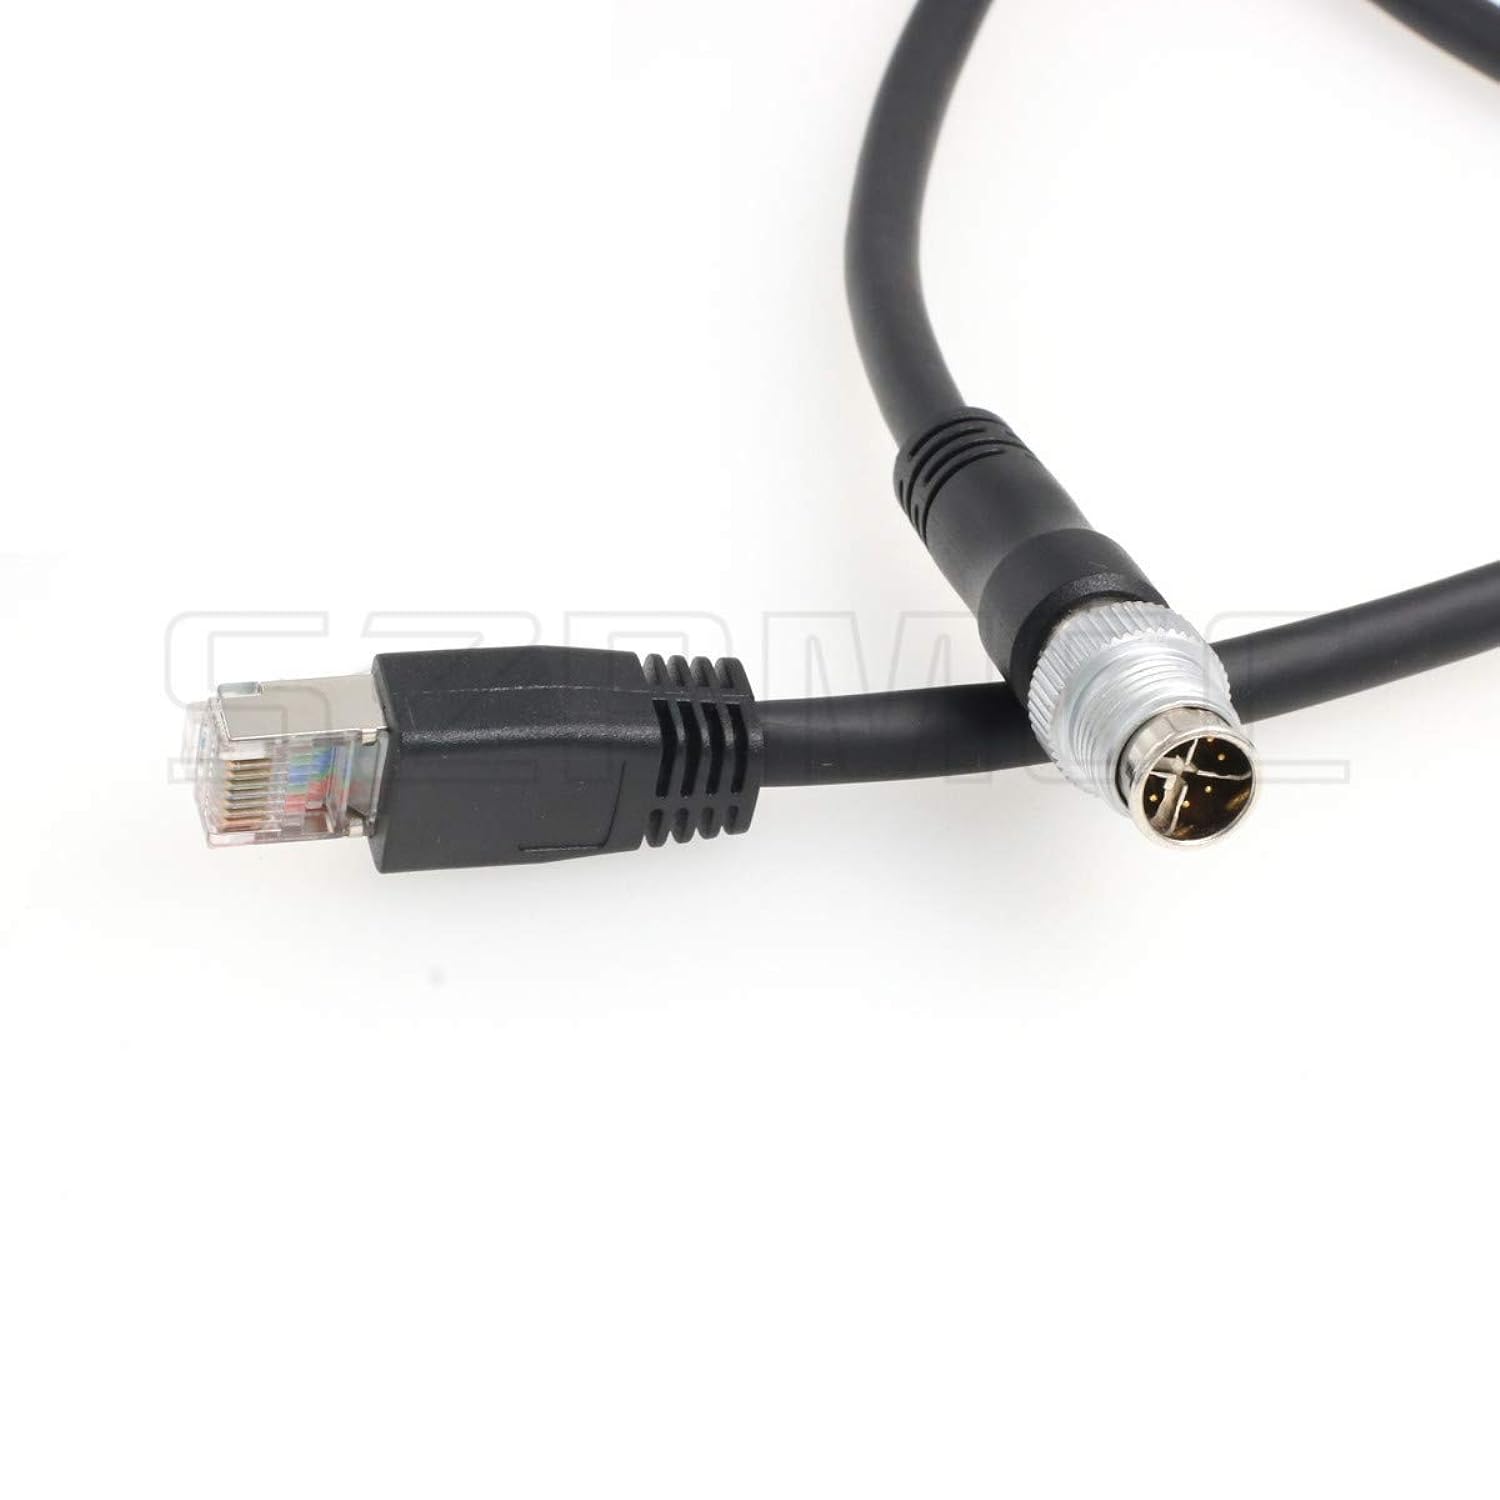 Great Choice Products M12 8 Pin X-Coded Male To Rj45 Ethernet Cable Cat7E Gigabit Shielded Waterproof Network Cable For Basler Gige Cognex In-Si…